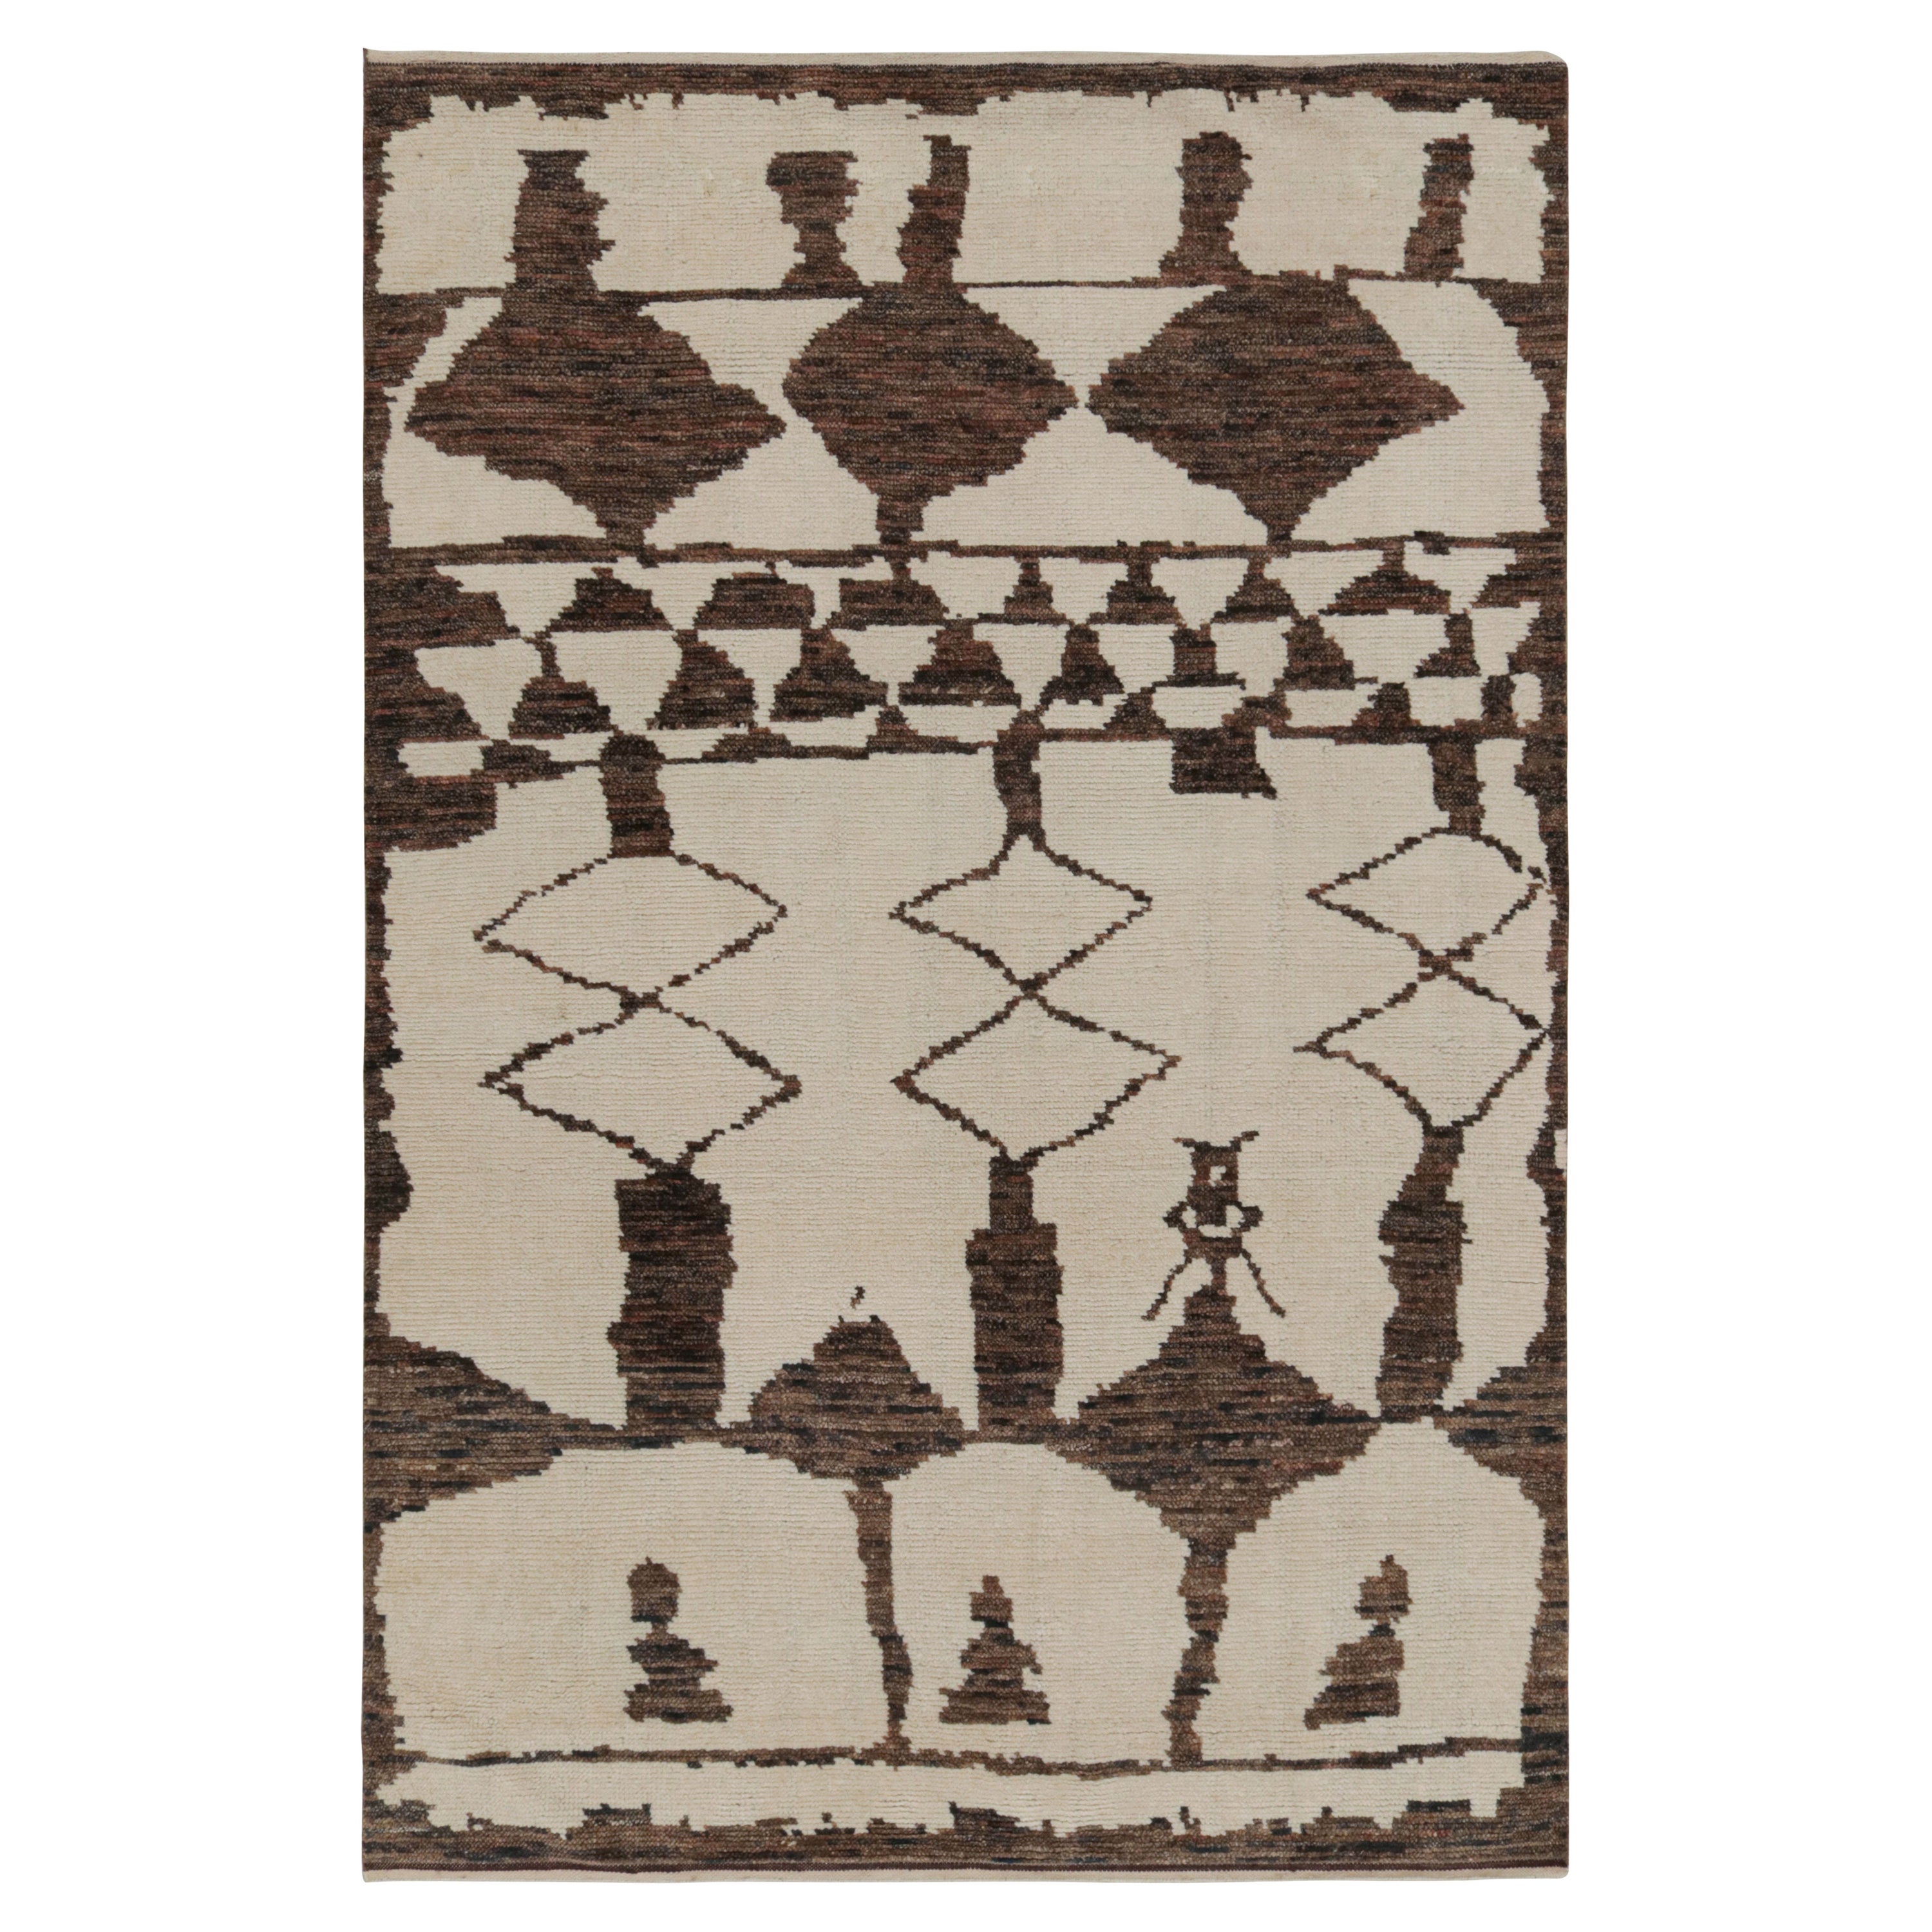 Rug & Kilim’s Contemporary Moroccan Style Geometric Rug in Beige-Brown For Sale